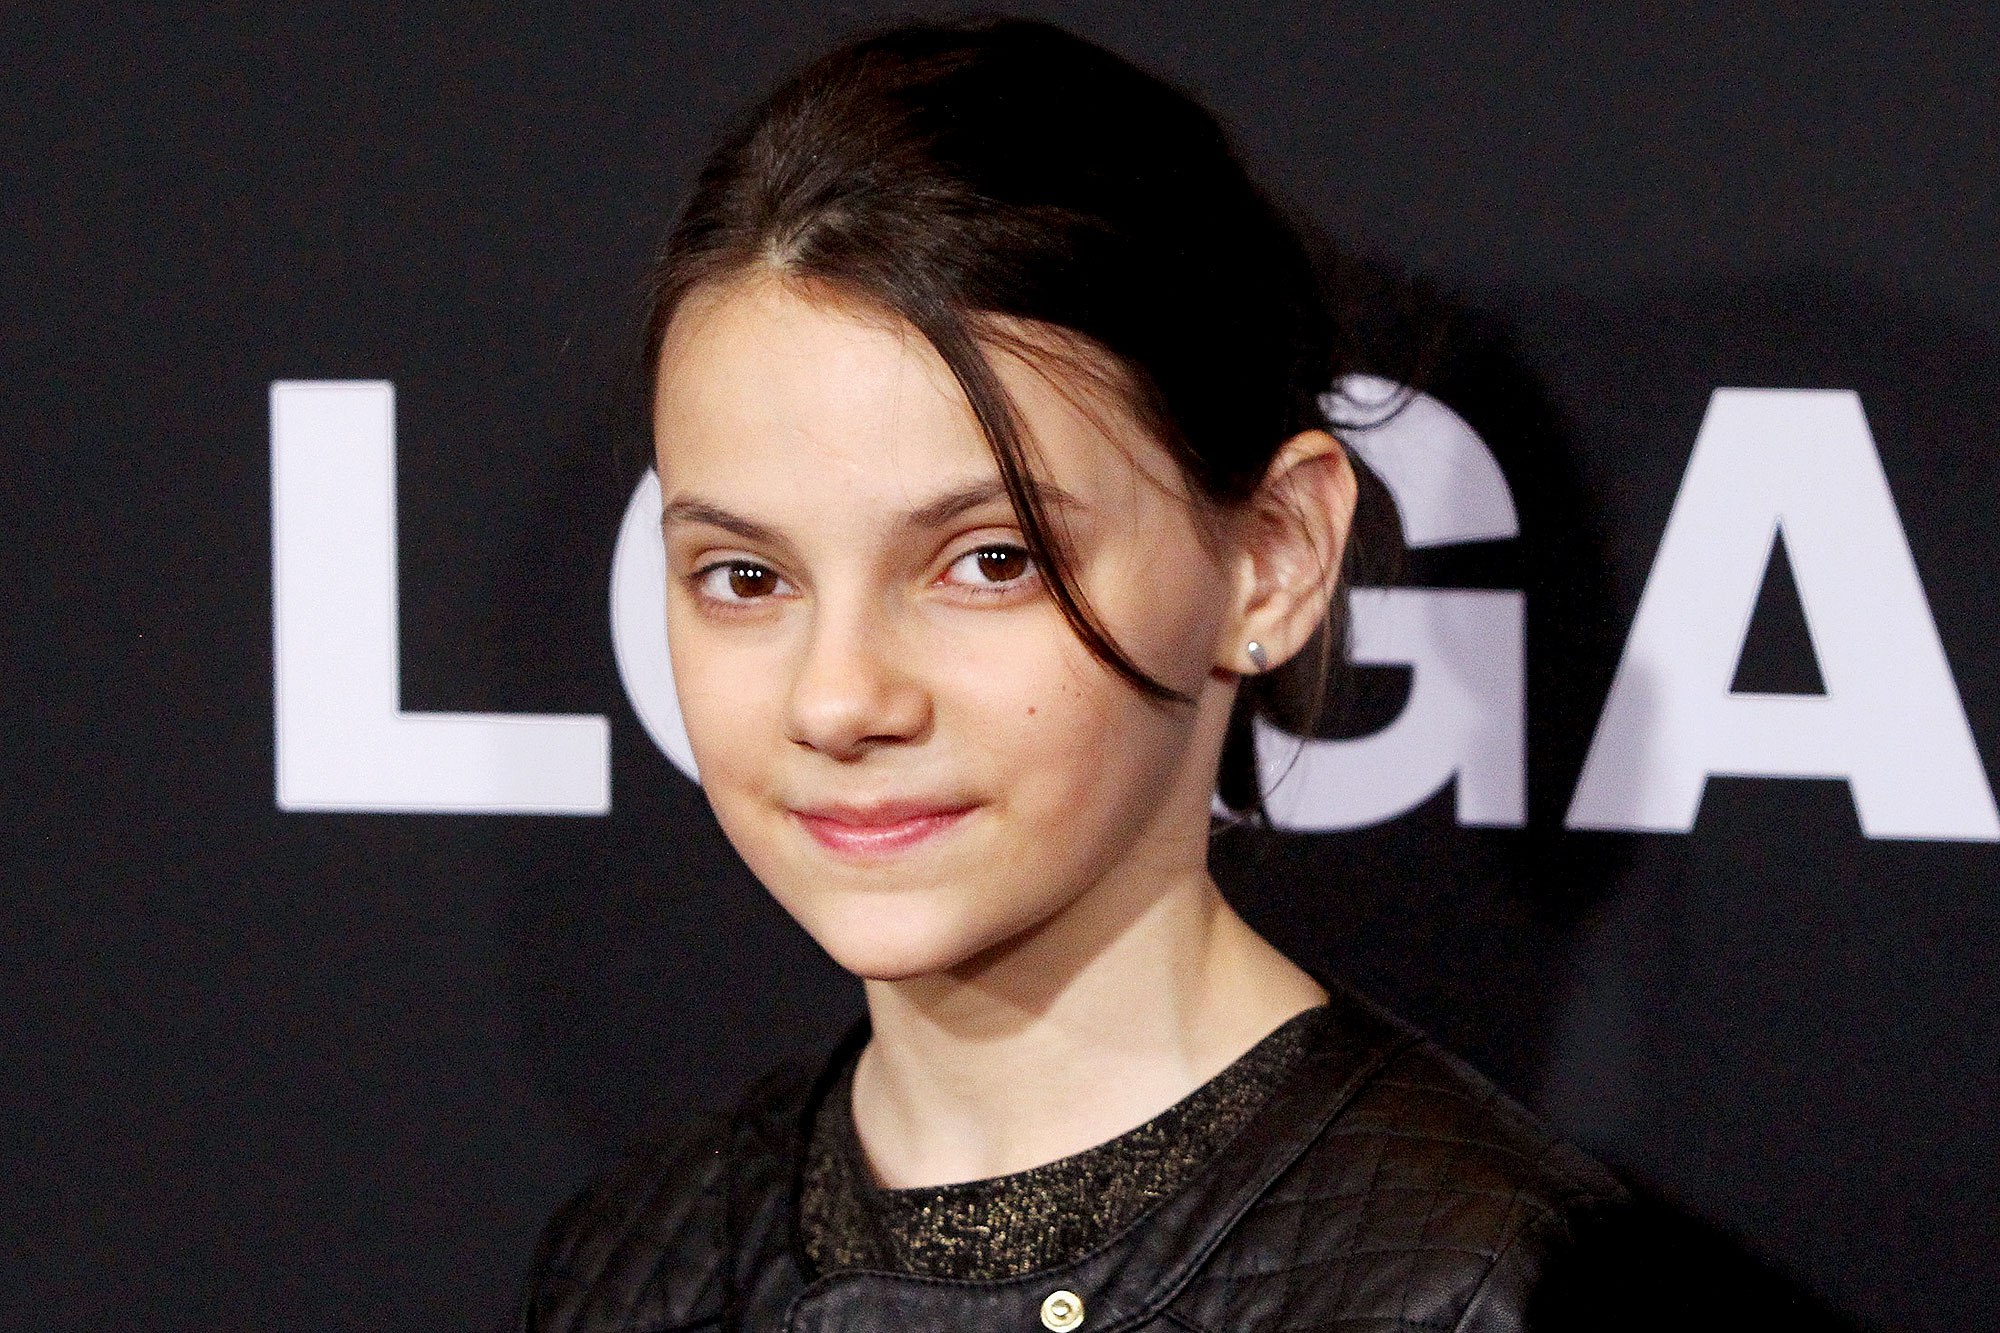 Dafne Keen Picture